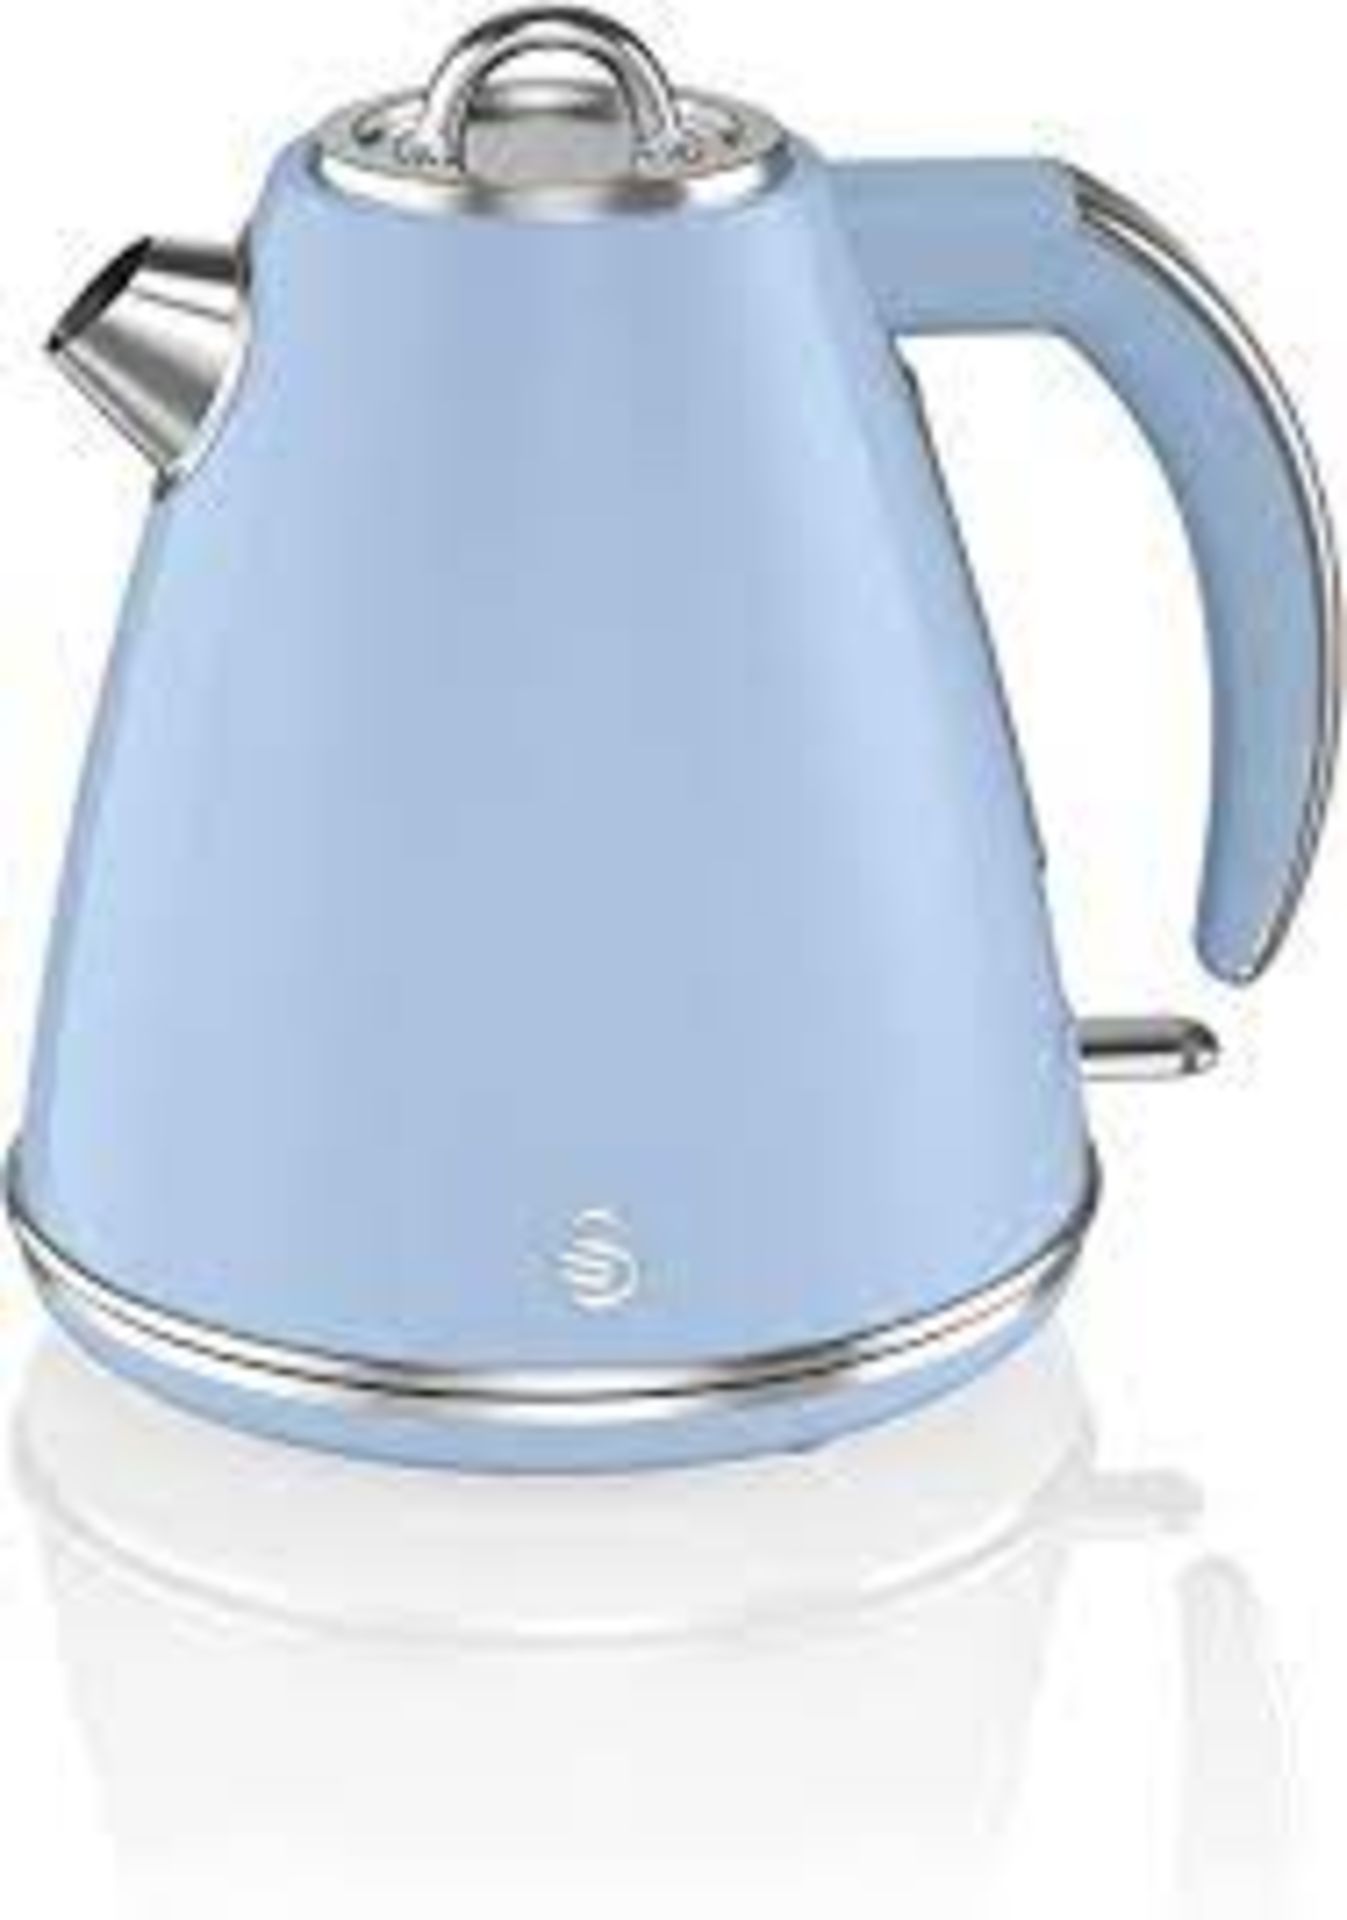 Swan Retro 1.5 Litre Jug Kettle, Blue, with 360 Degree Rotational Base, 3KW Fast Boil, Easy Pour, SK